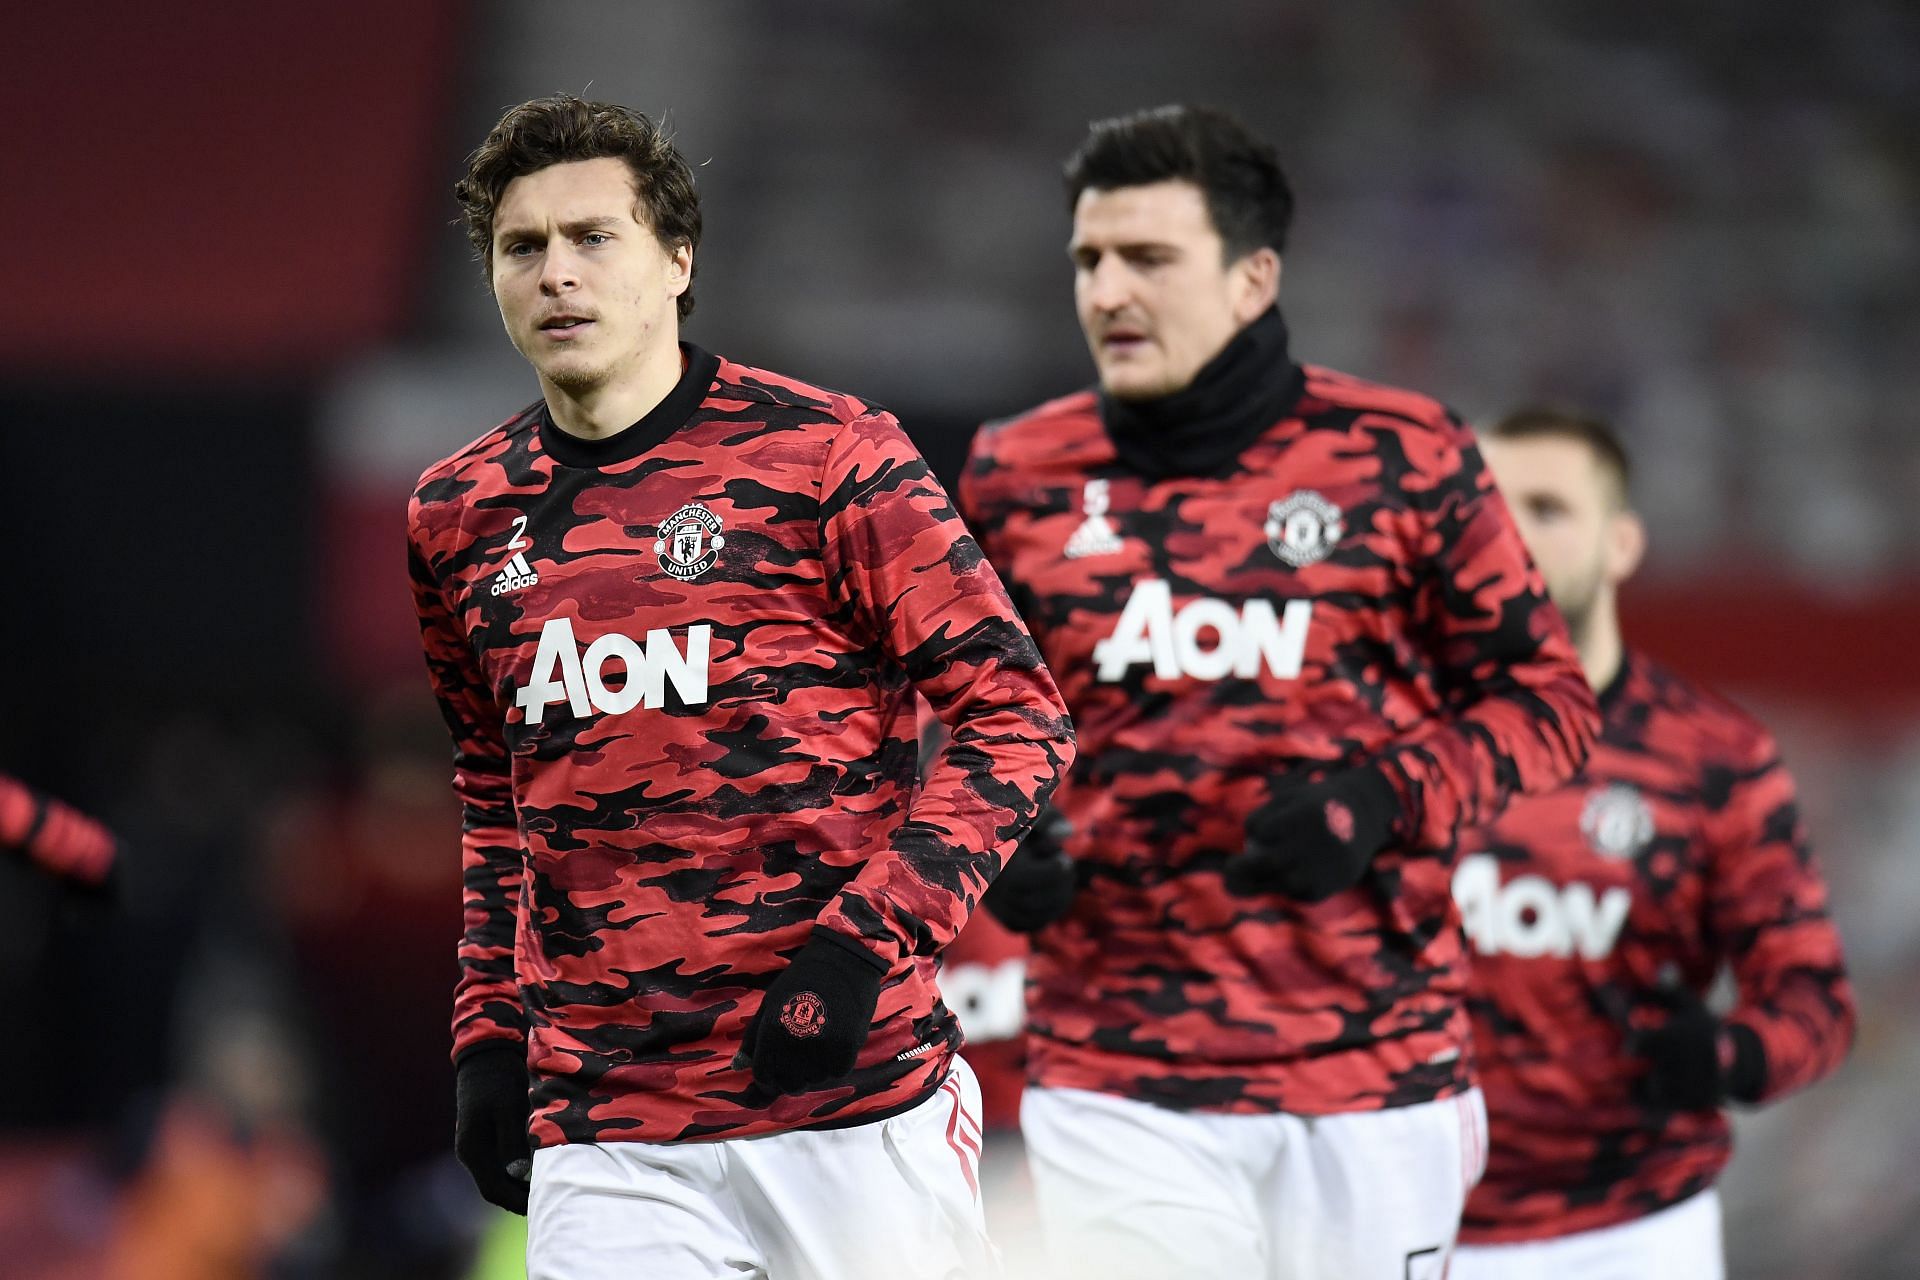 Lindelof and Maguire could face spells on the bench